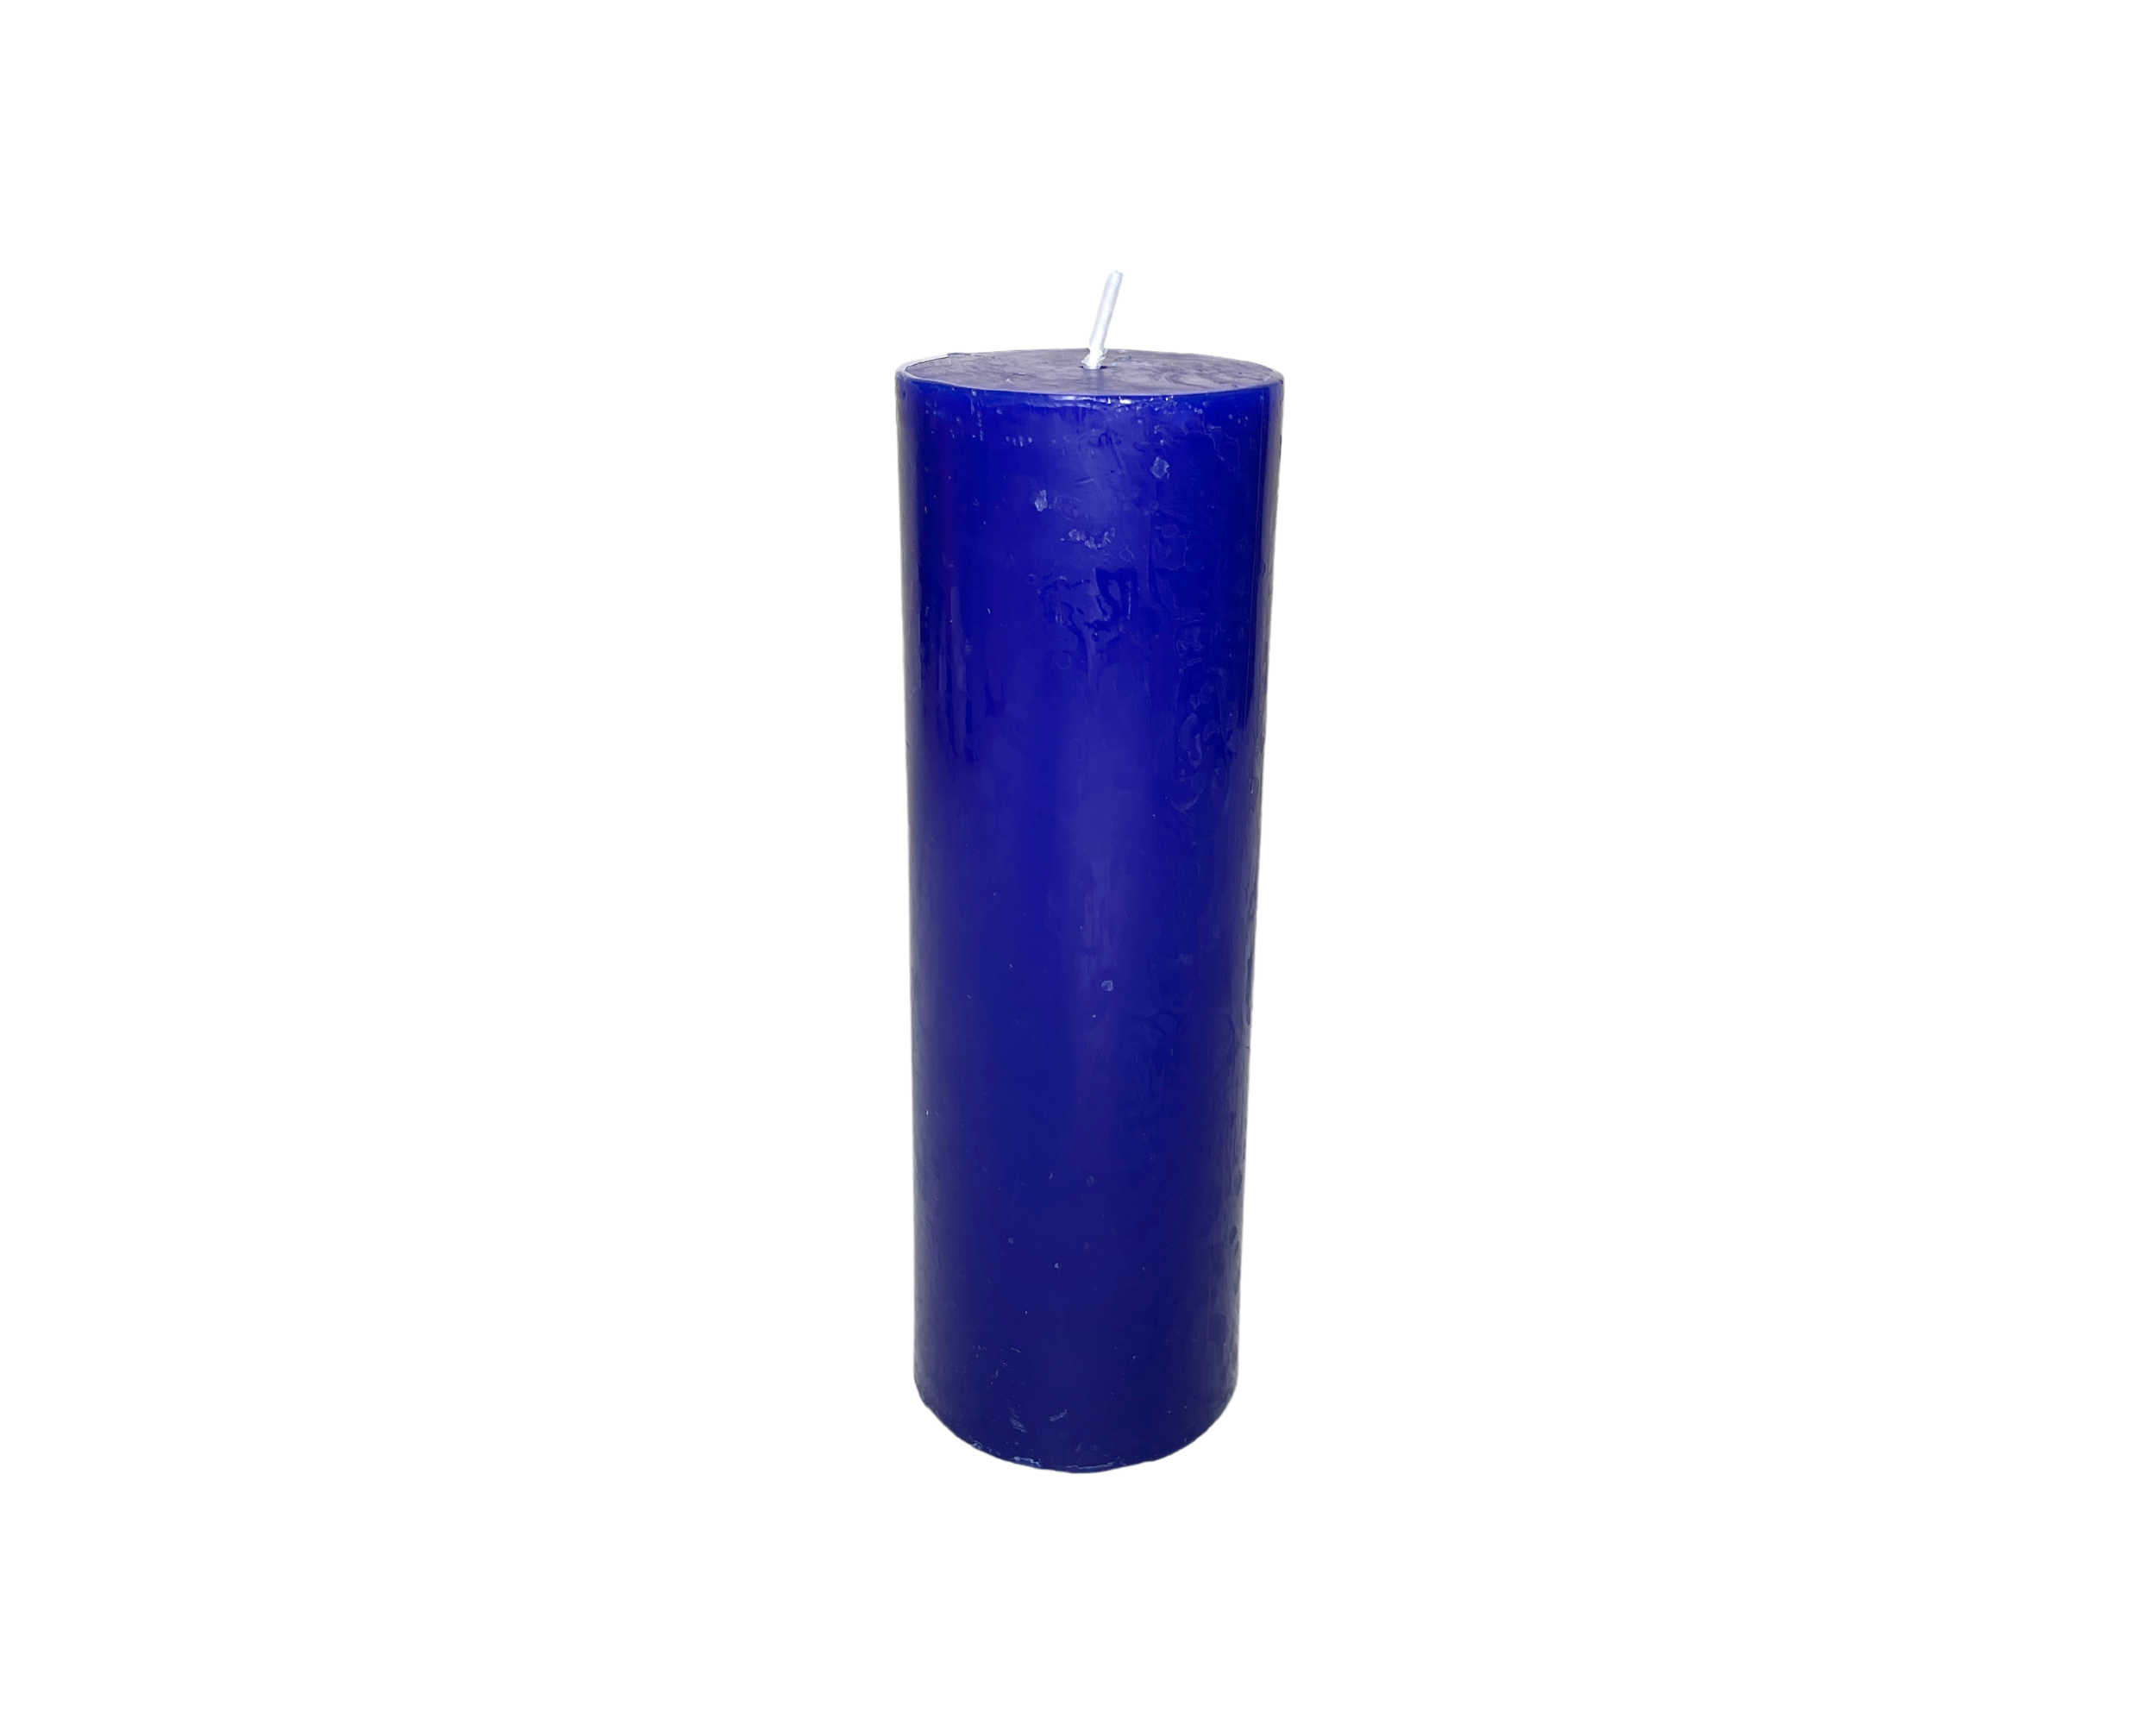 Buy Online Latest and Unique Blue Pillar Candle 2" x 6" - Health, Harmony, Balance, Communication | Shop Best Spiritual Items - The Mystical Ritual